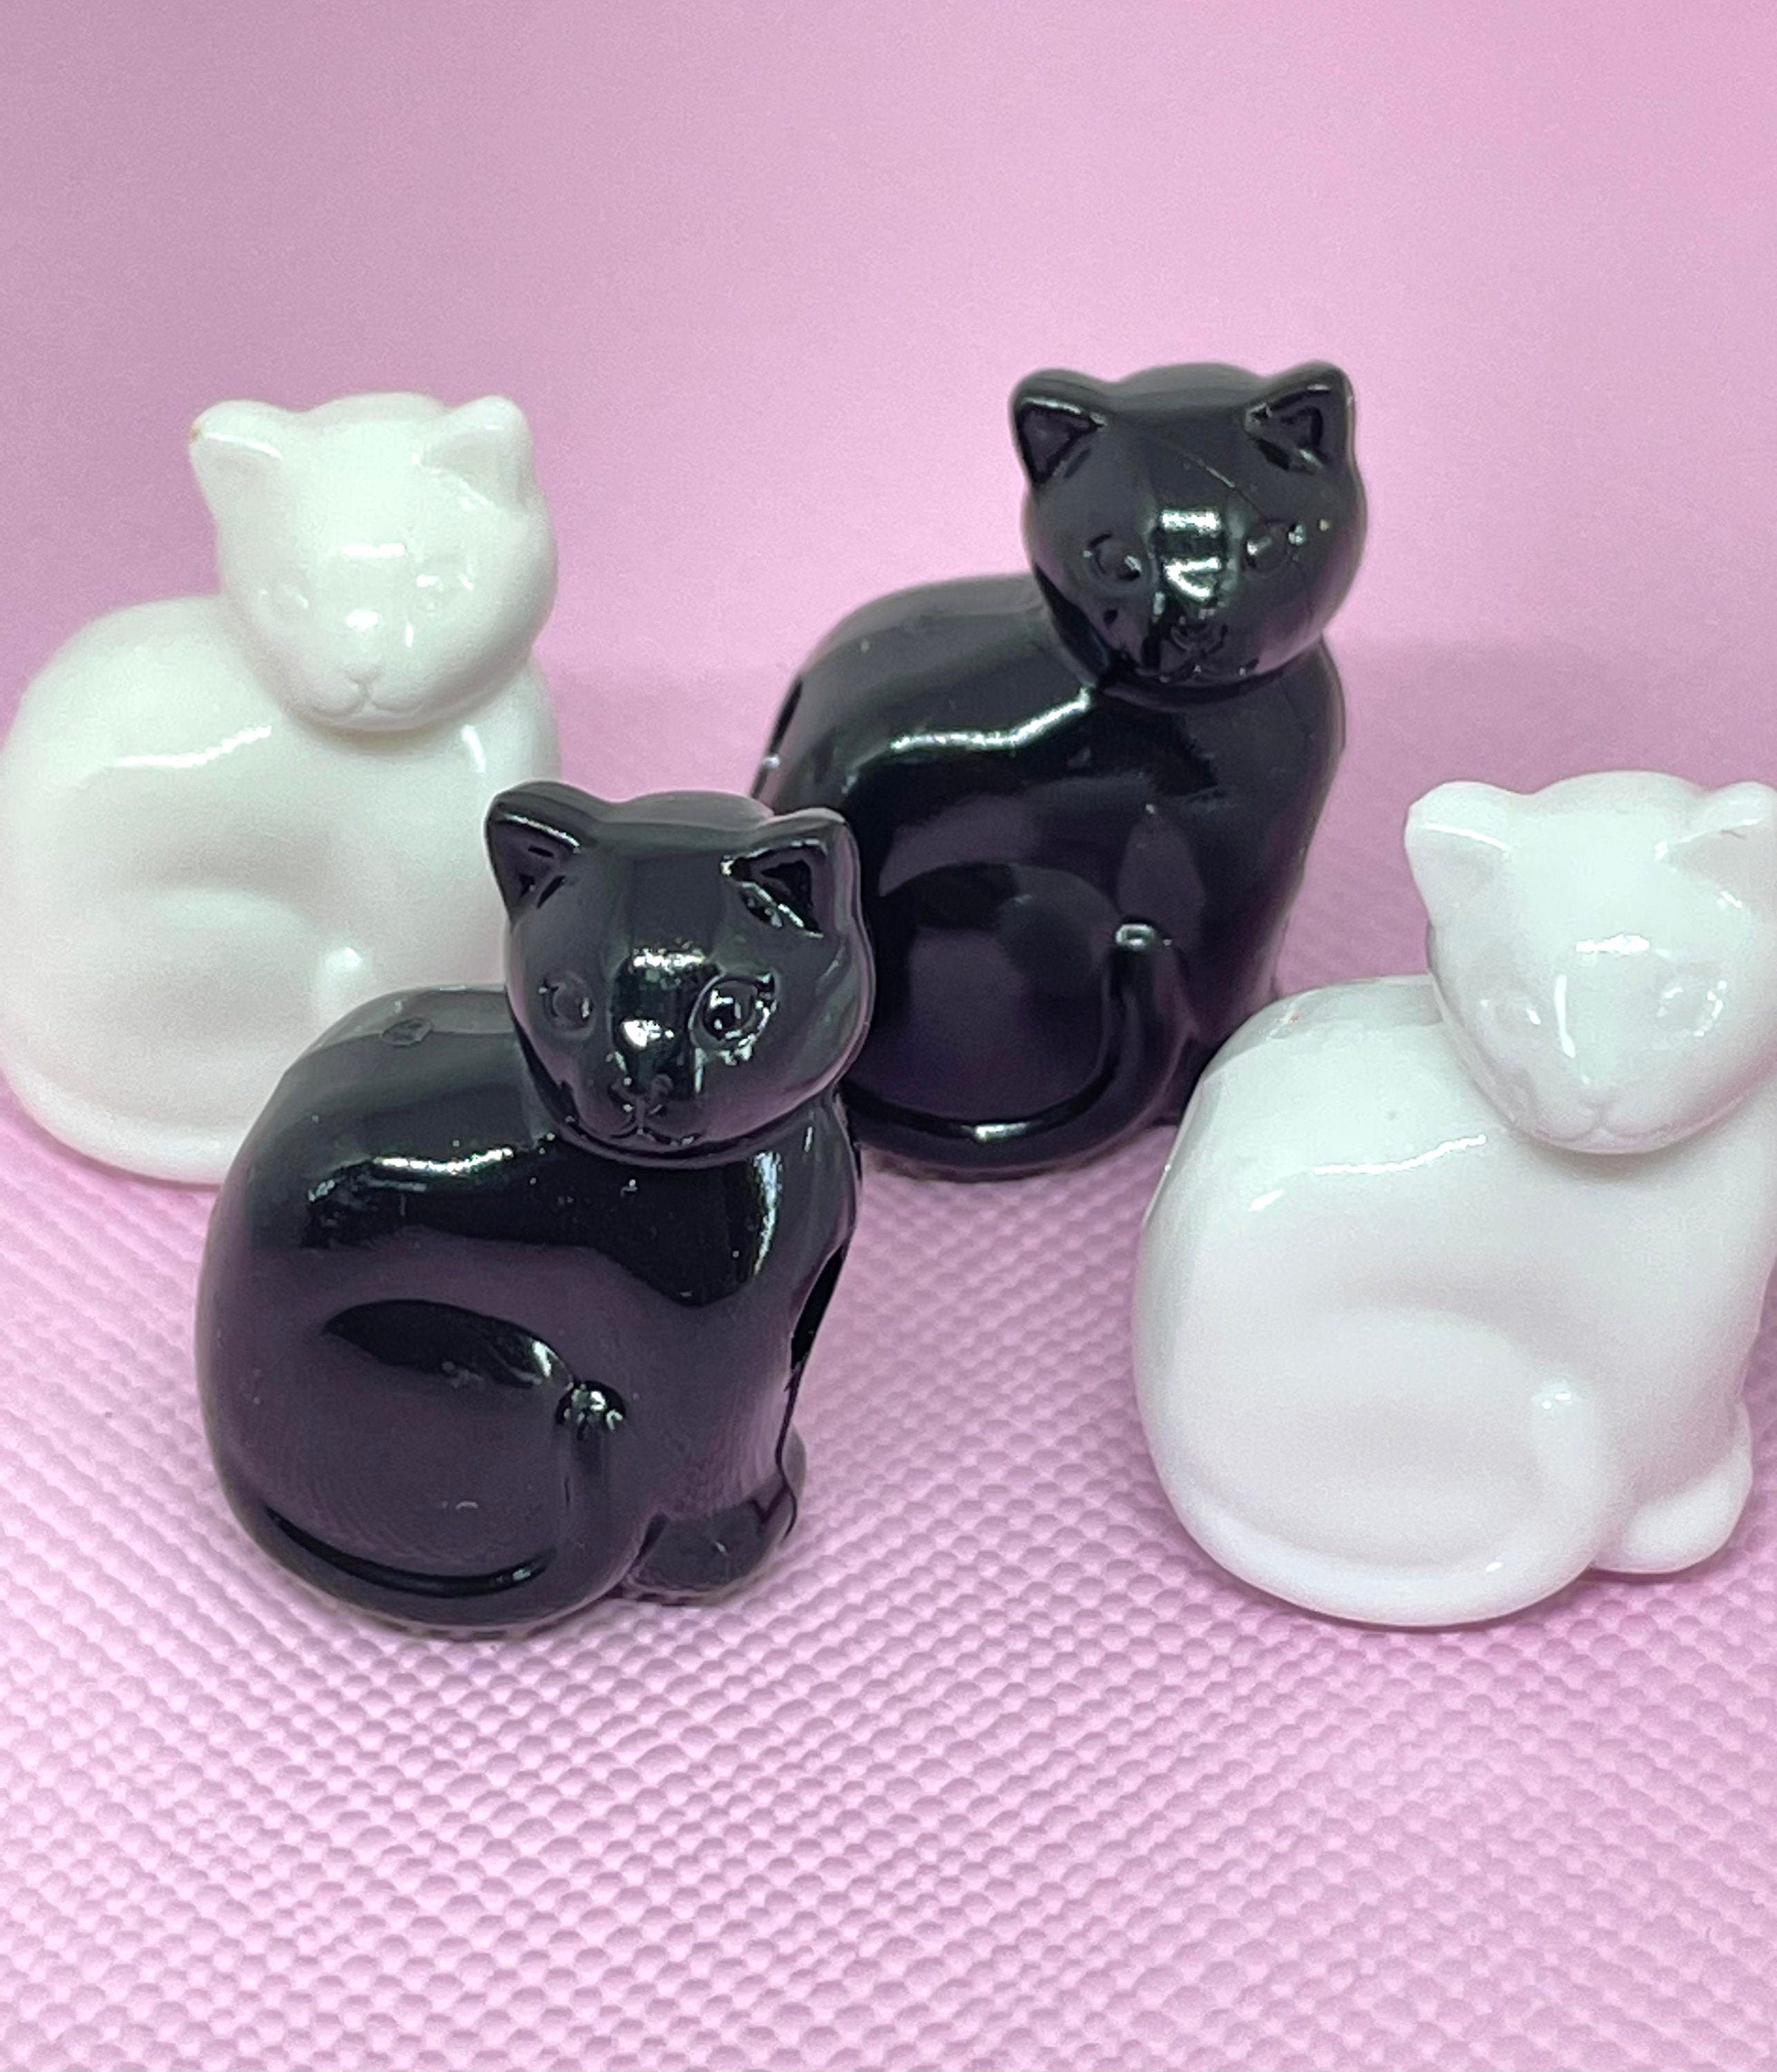 Black Cat Beads, Animal Beads for Jewelry, Black Pet Beads, Black Halloween Beads for Crafts, Halloween Themed Beads